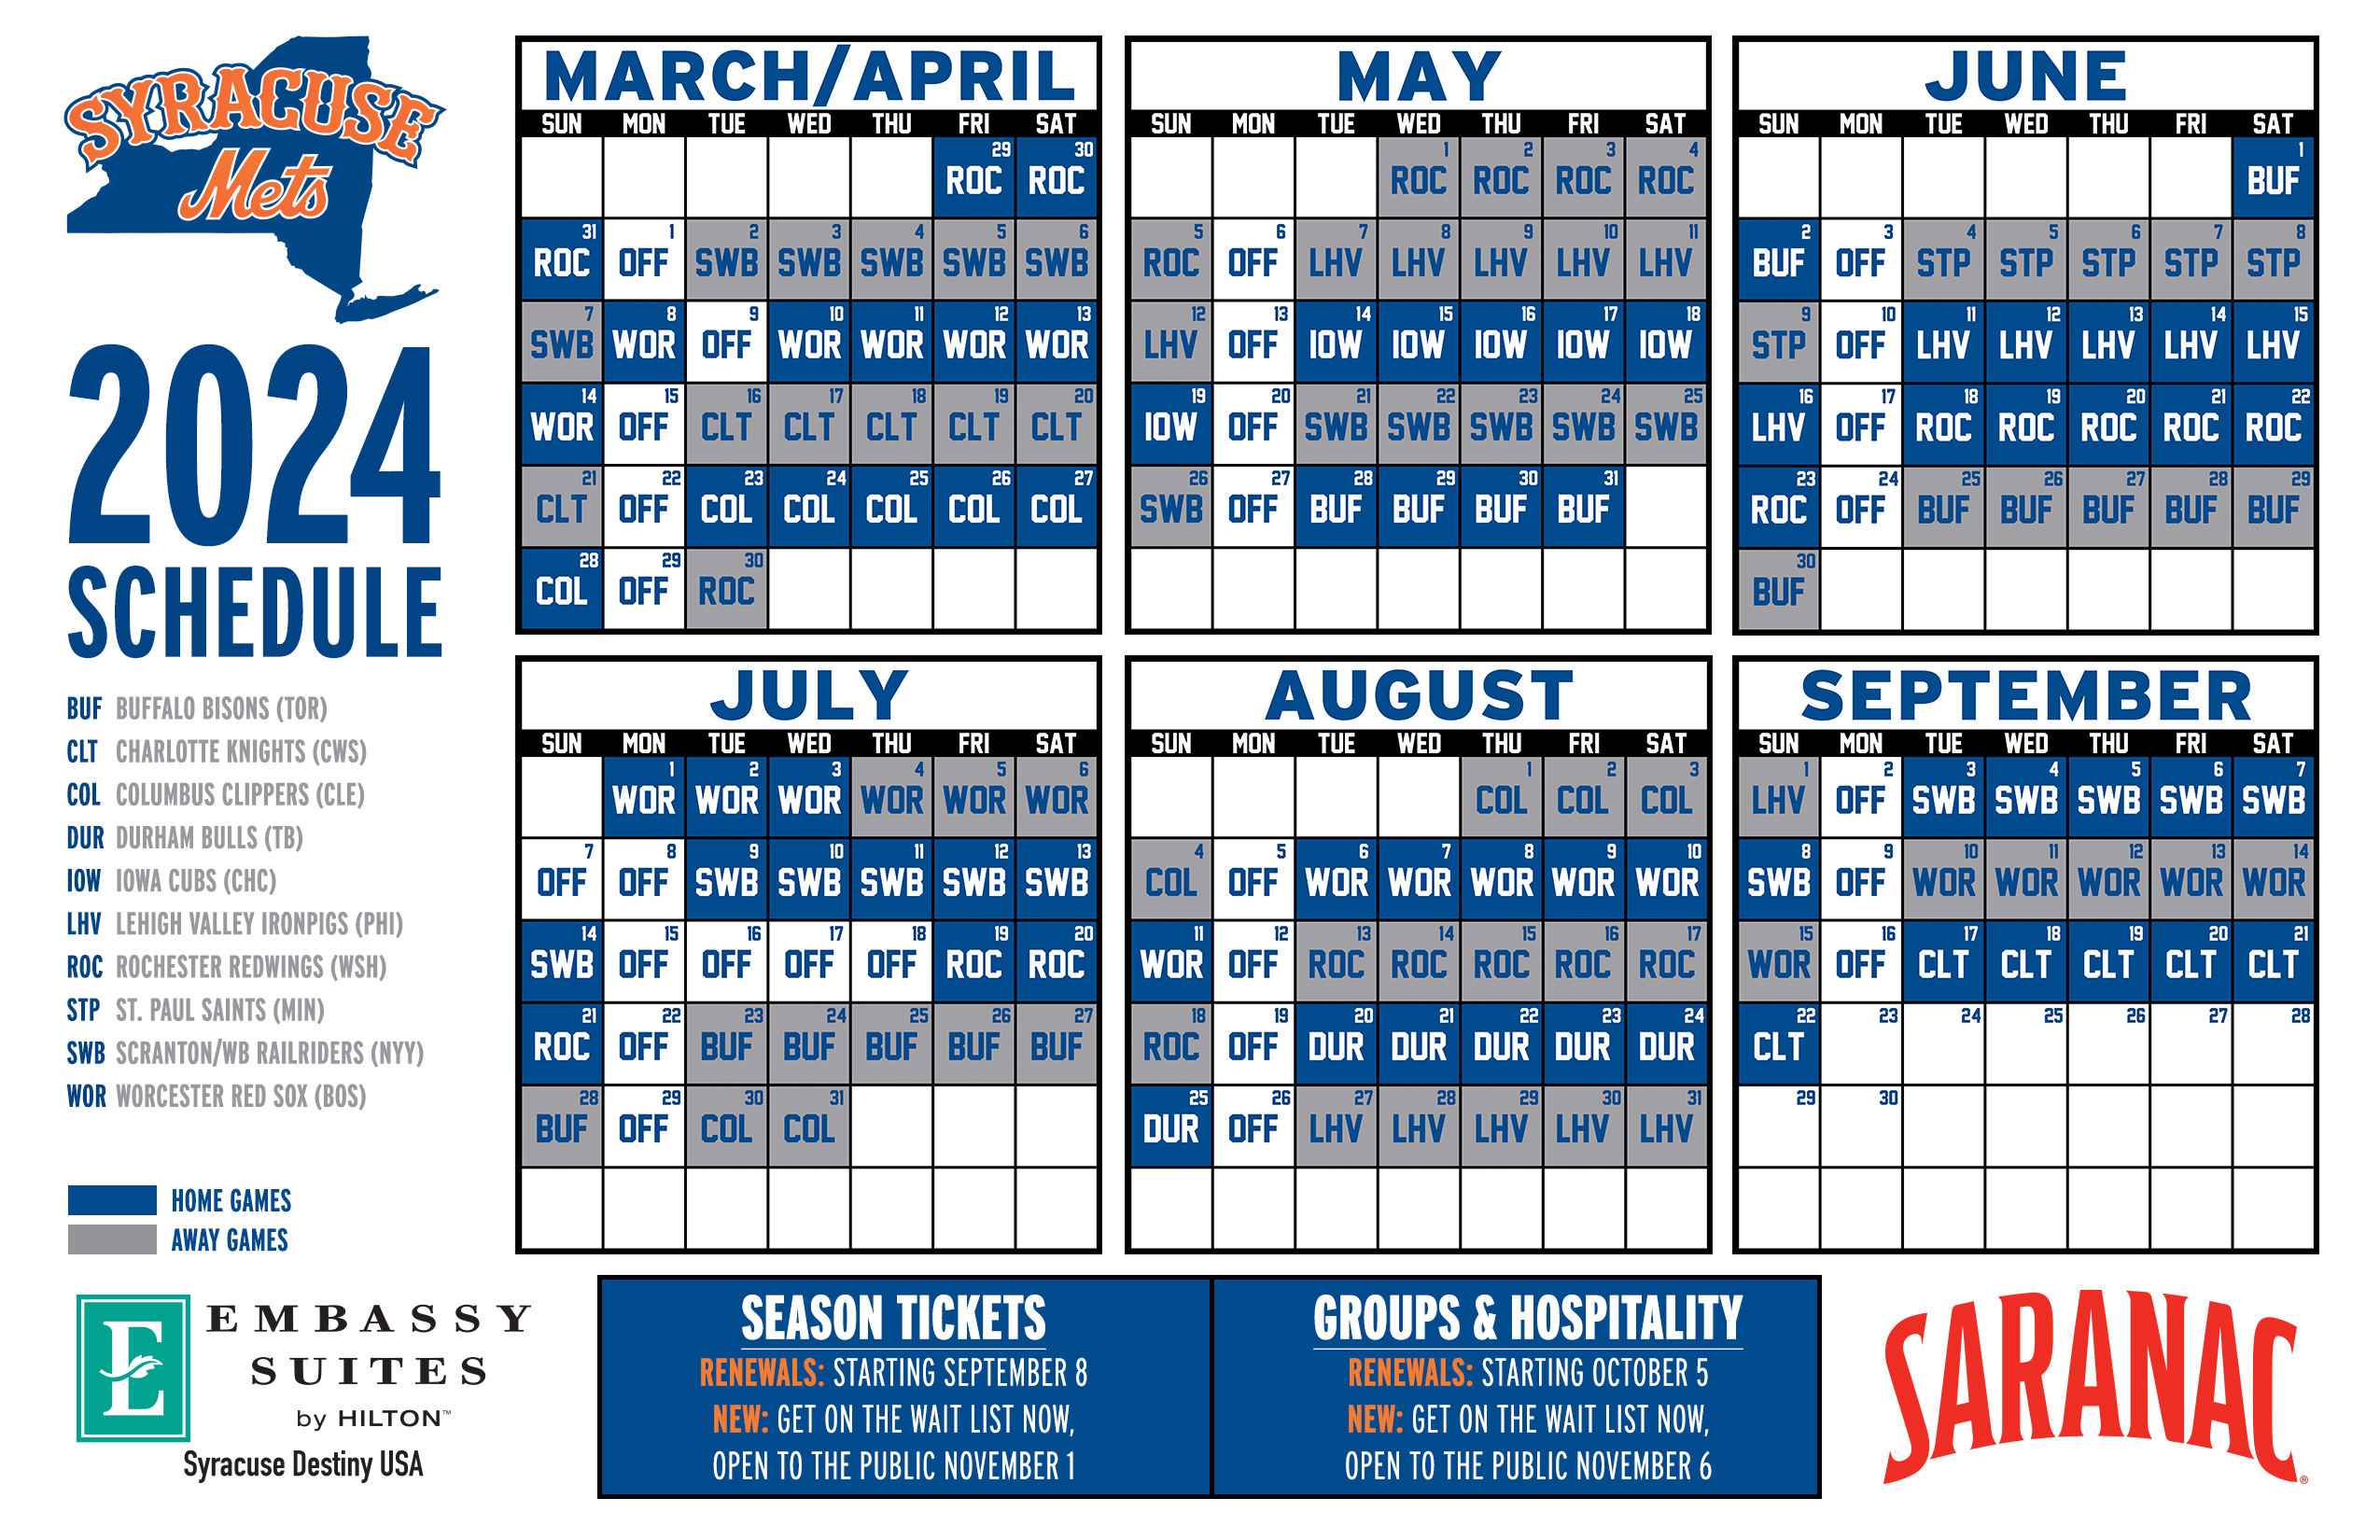 Syracuse Mets - On Saturday, August 27, #GetSalty and get to NBT